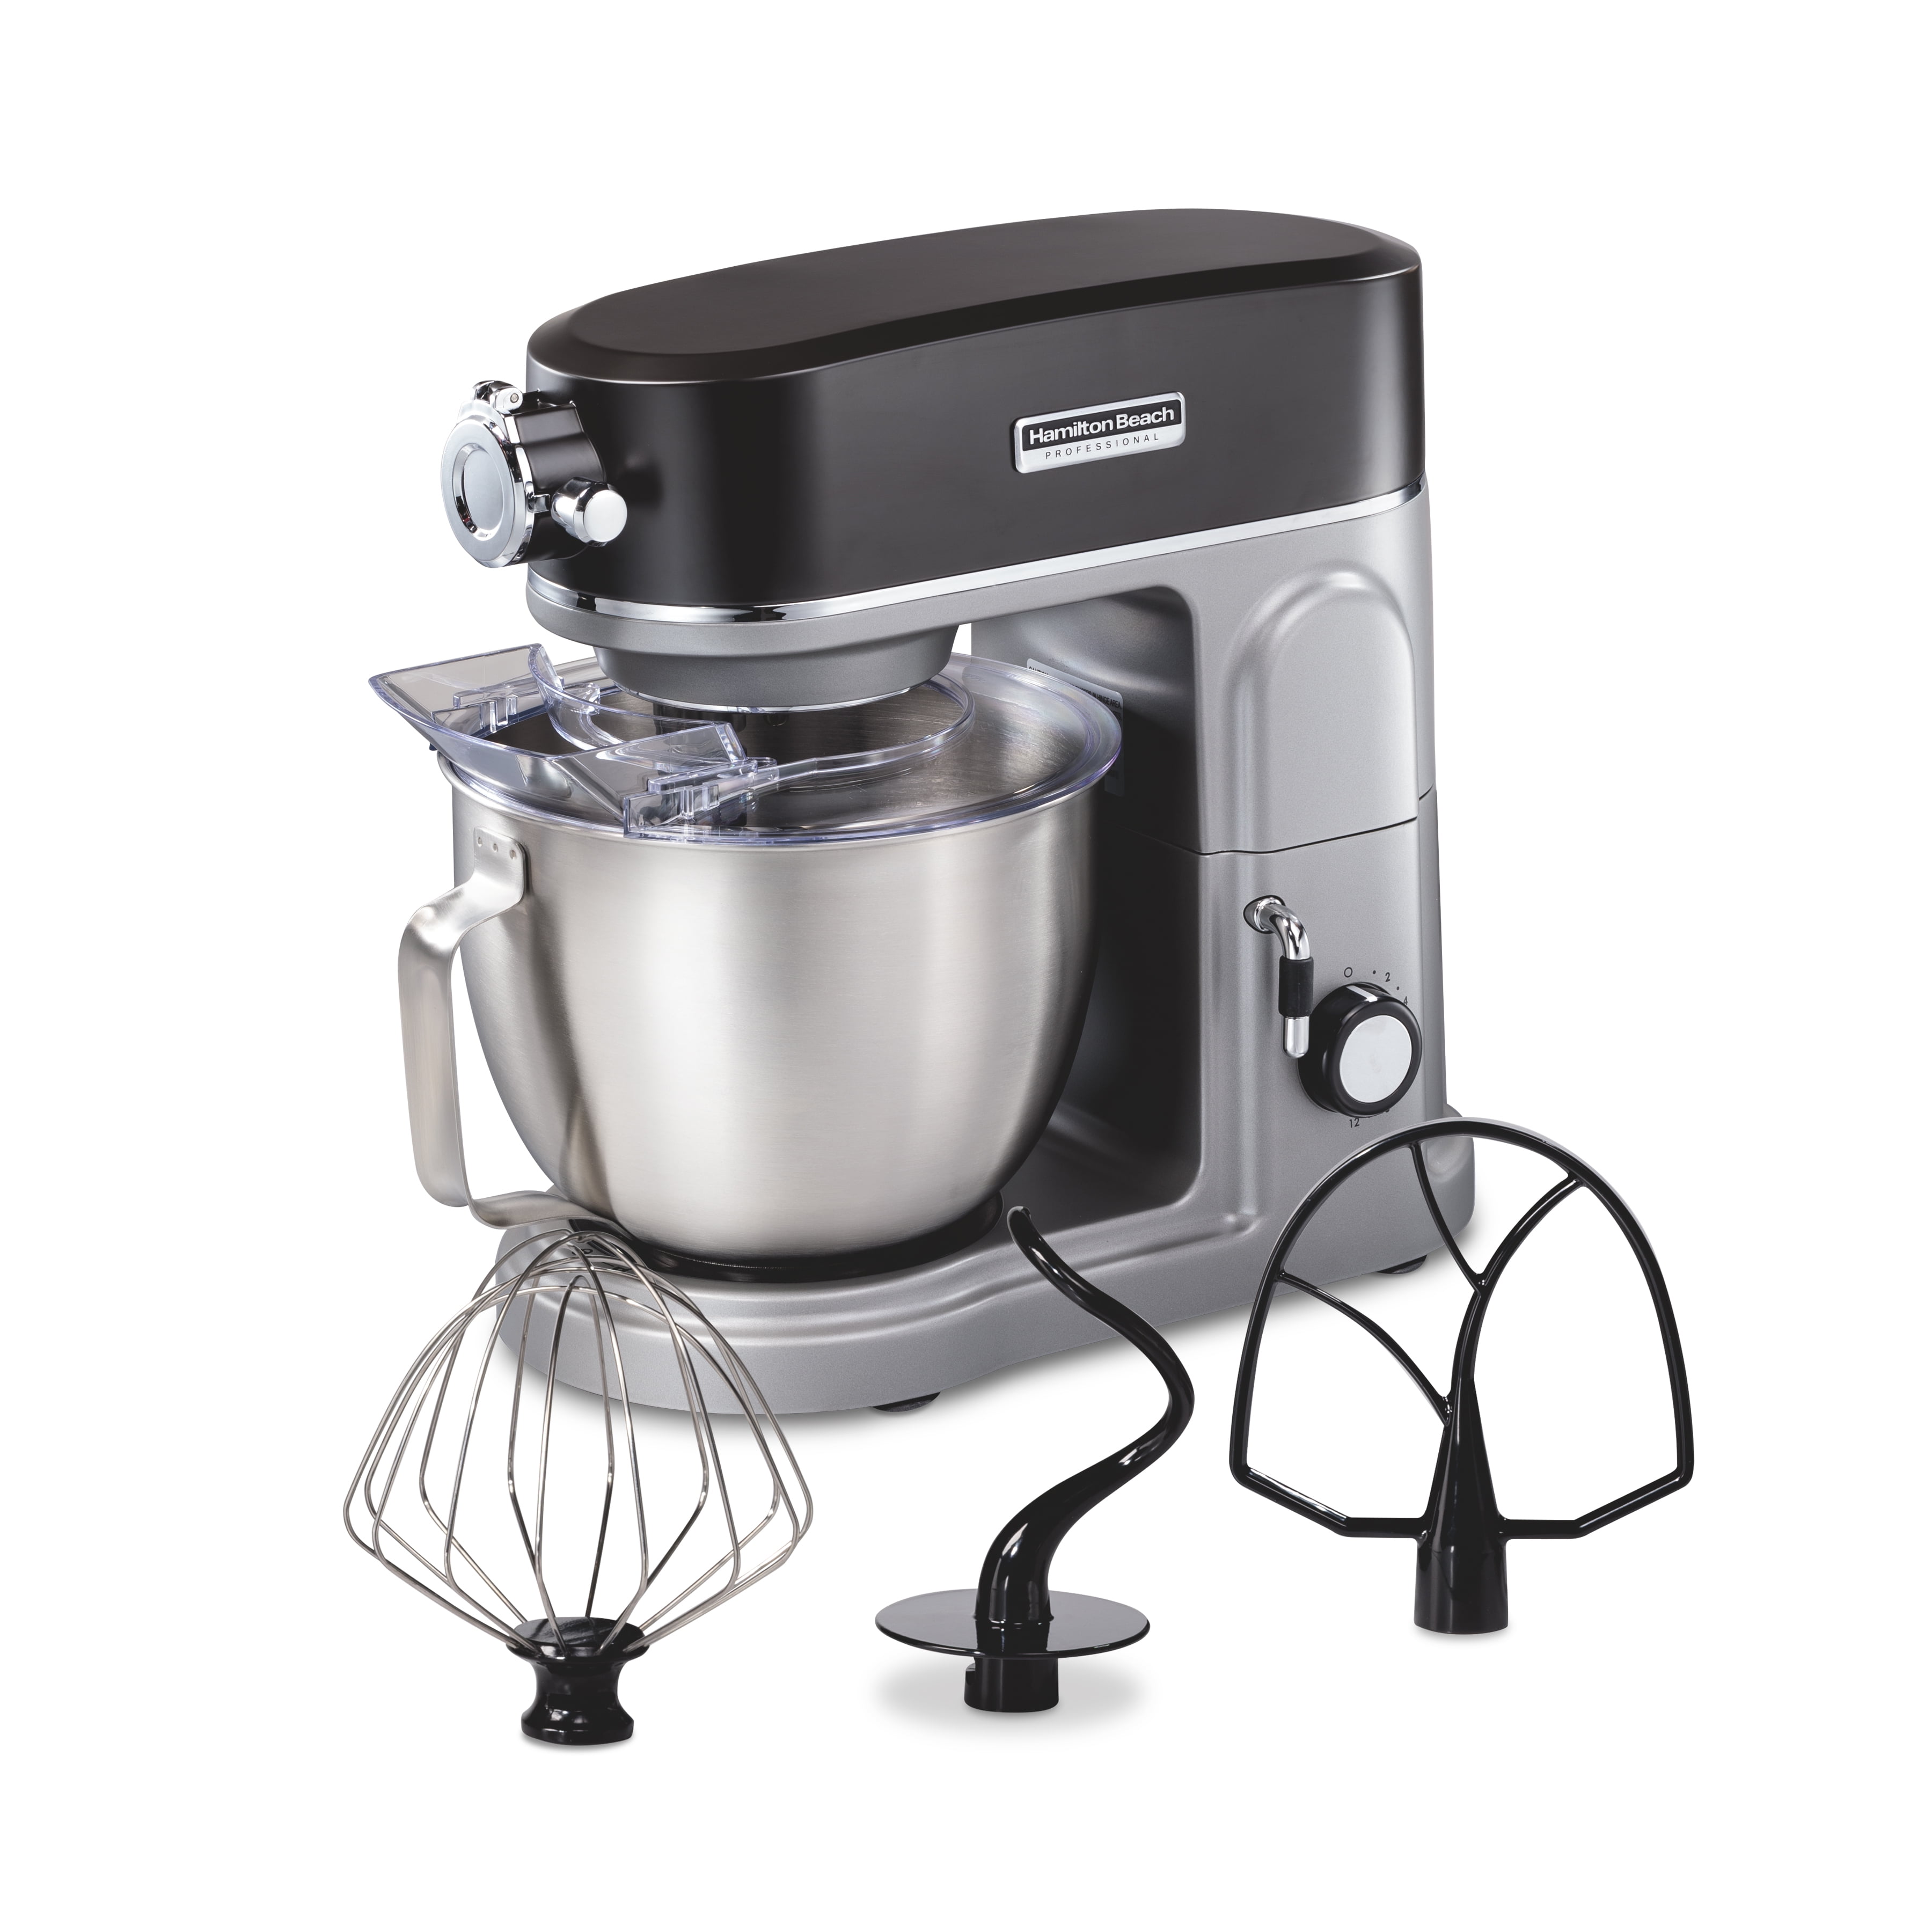 Pawn 1 - The KitchenAid Artisan stand mixer is the perfect kitchen  companion. The mixer includes a 5 quart stainless steel bowl with handle,  dough hook, flat beater, and wire whip. The